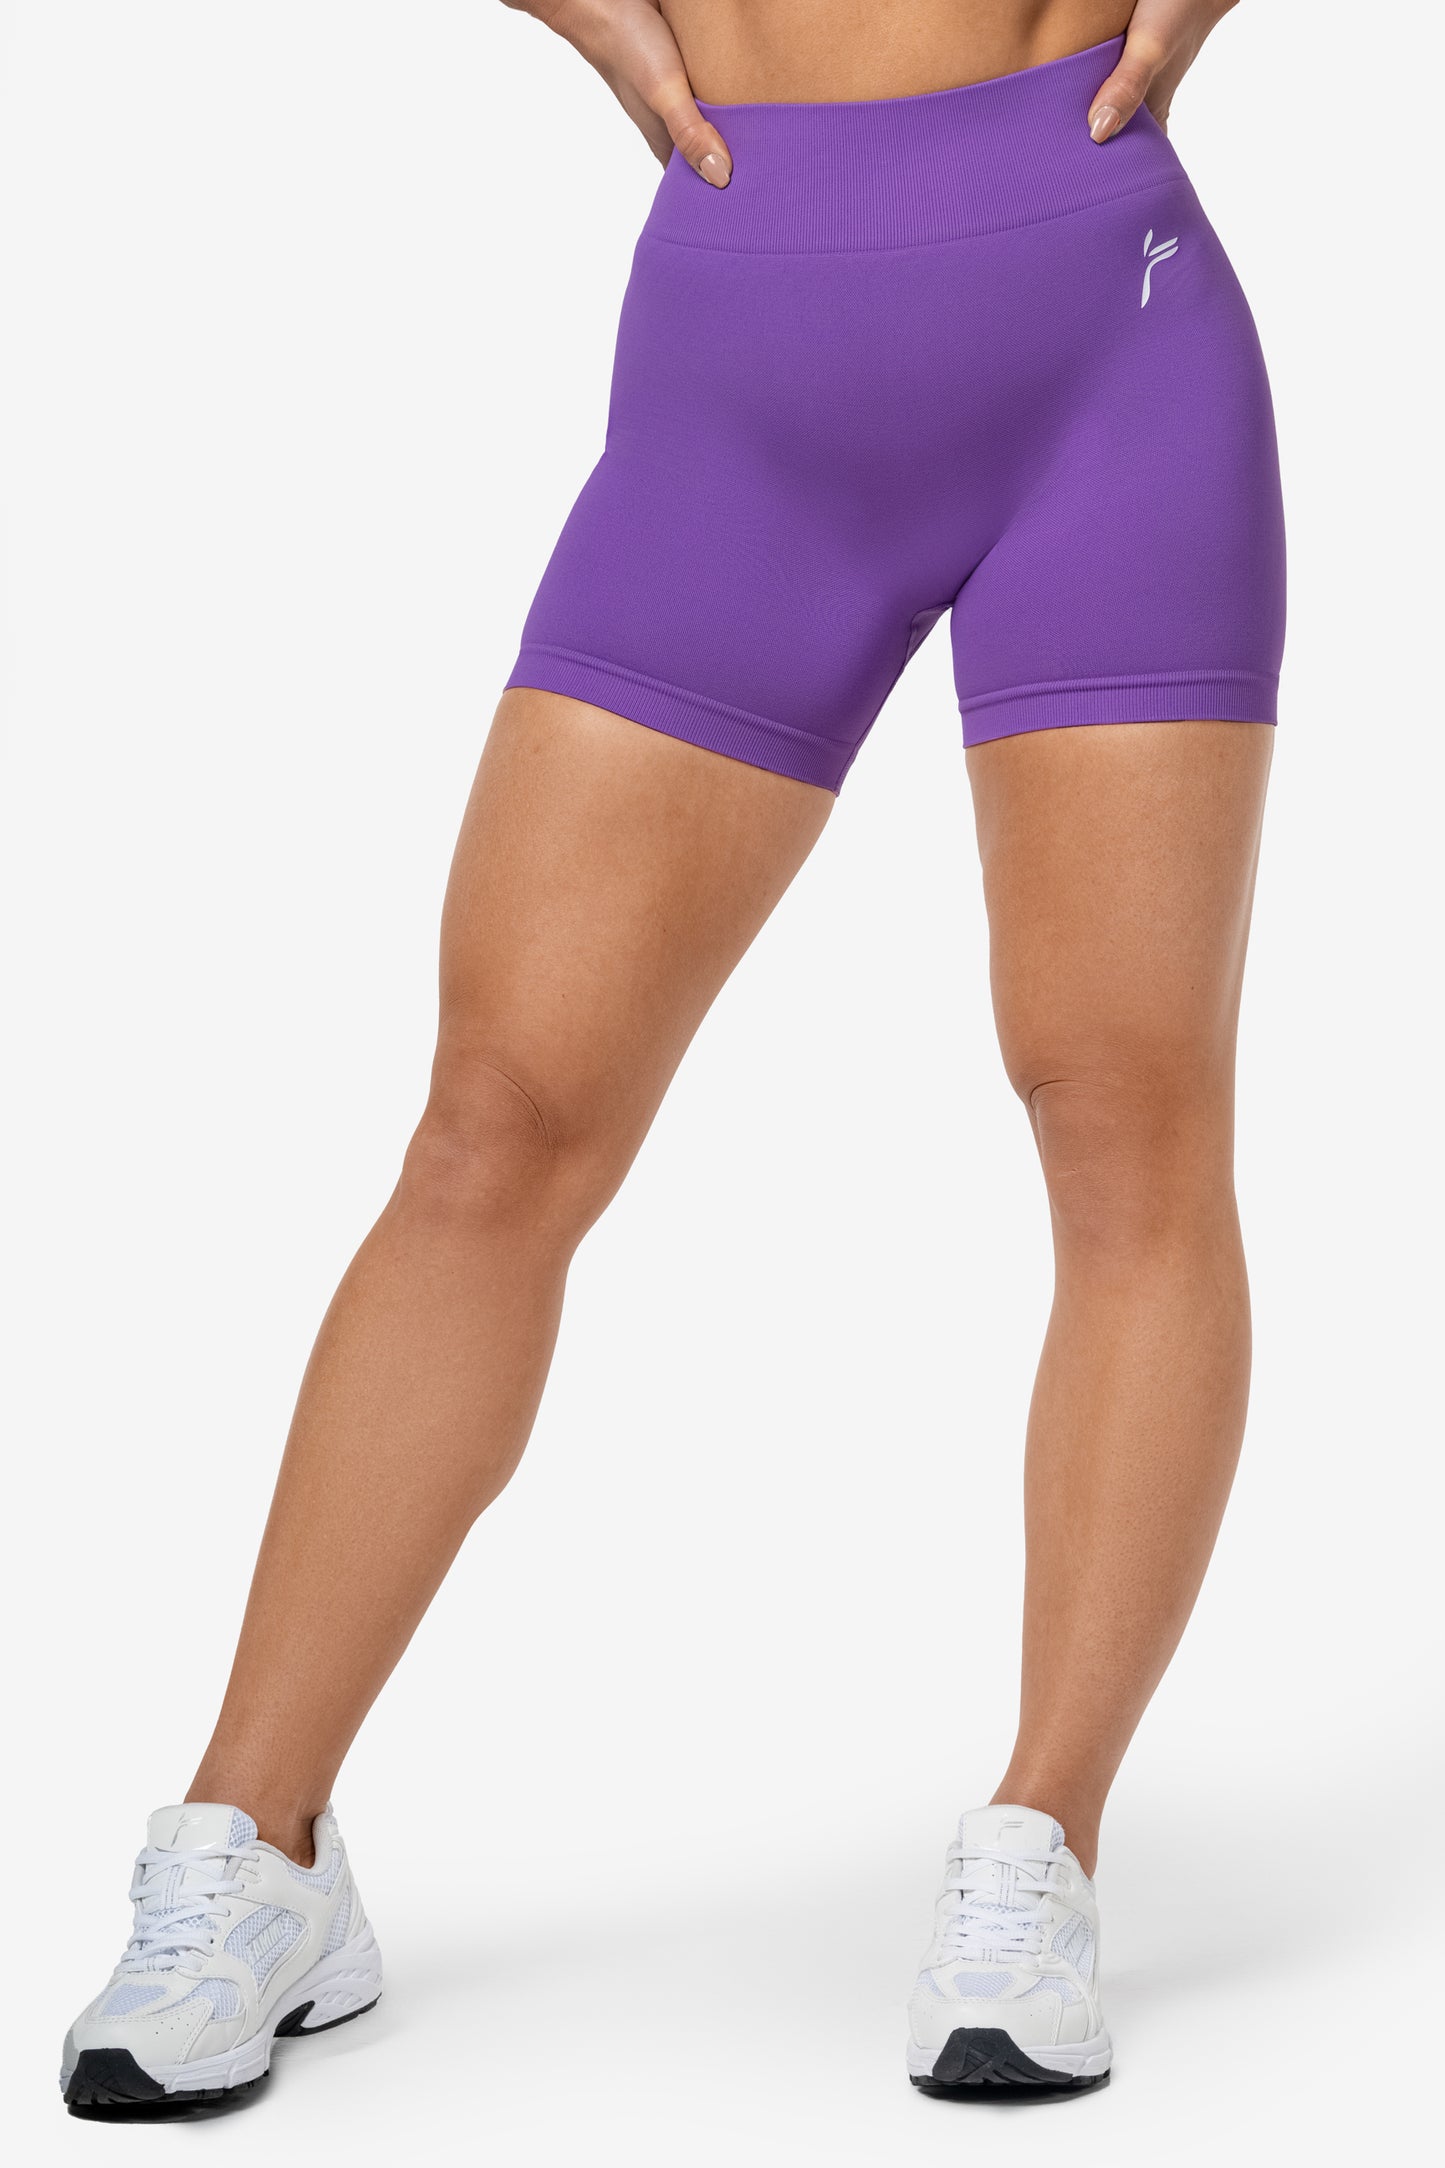 Purple Lunge Scrunch Shorts - for dame - Famme - Shorts